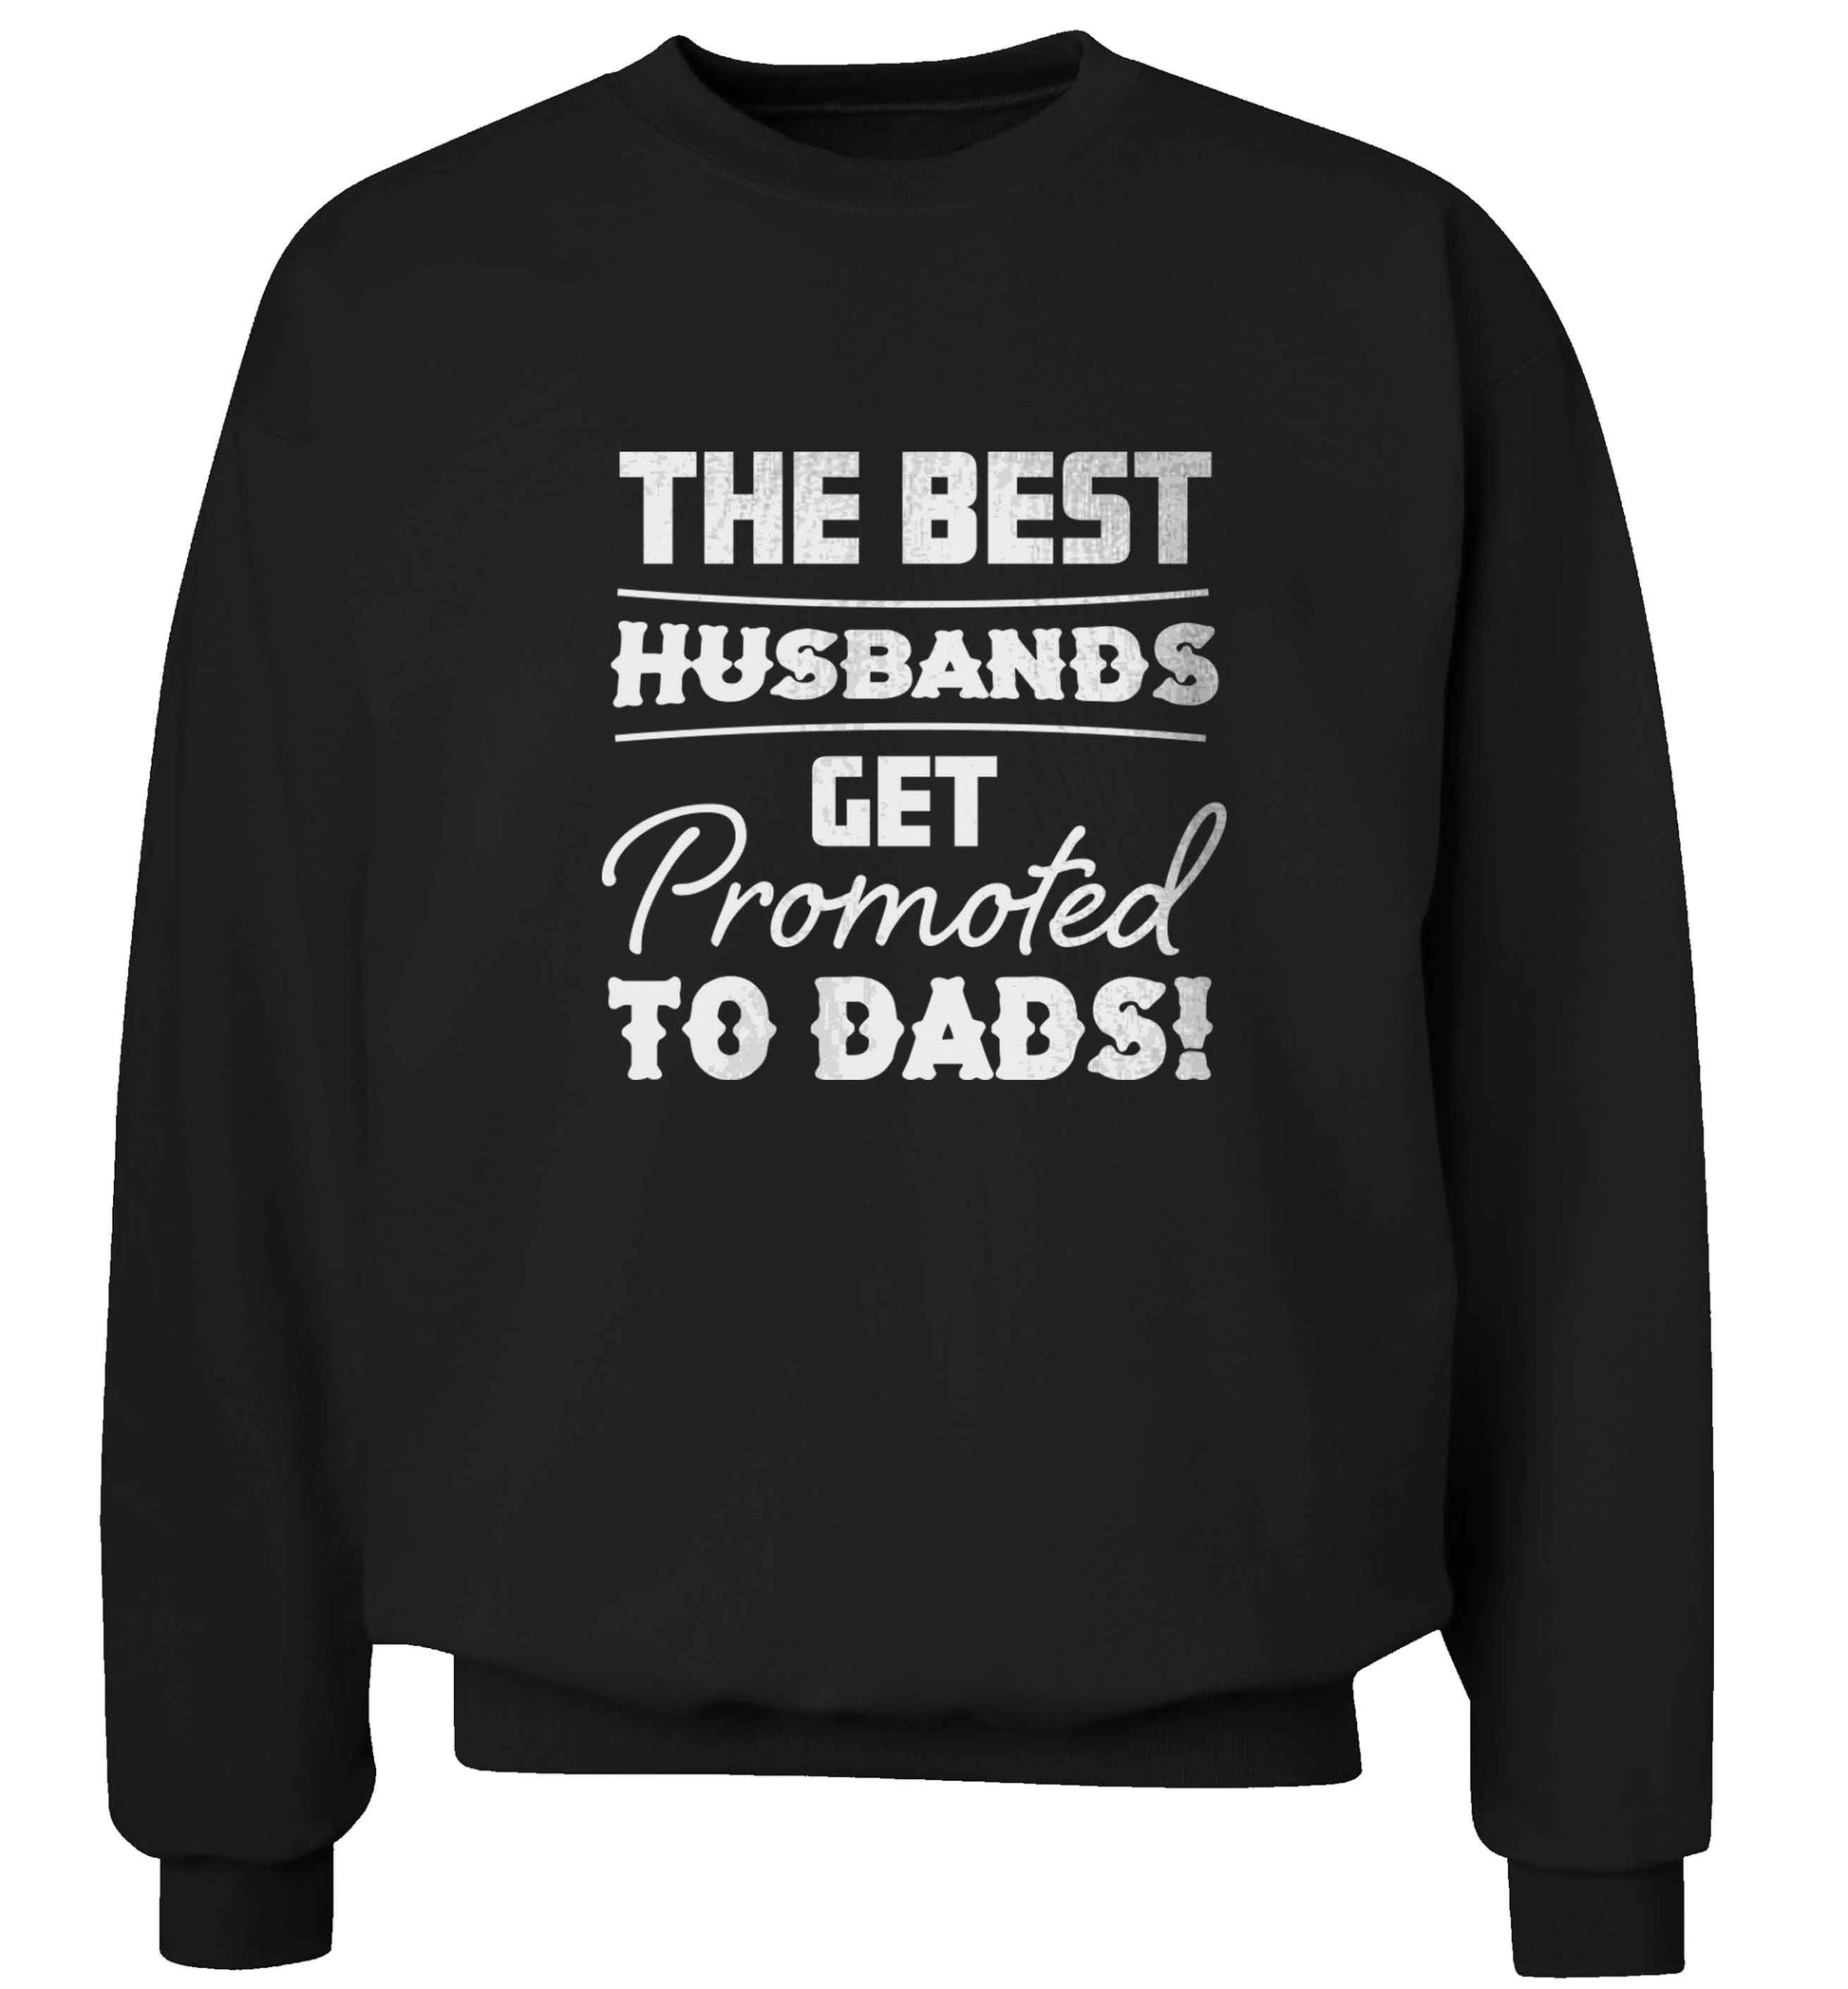 The best husbands get promoted to Dads adult's unisex black sweater 2XL